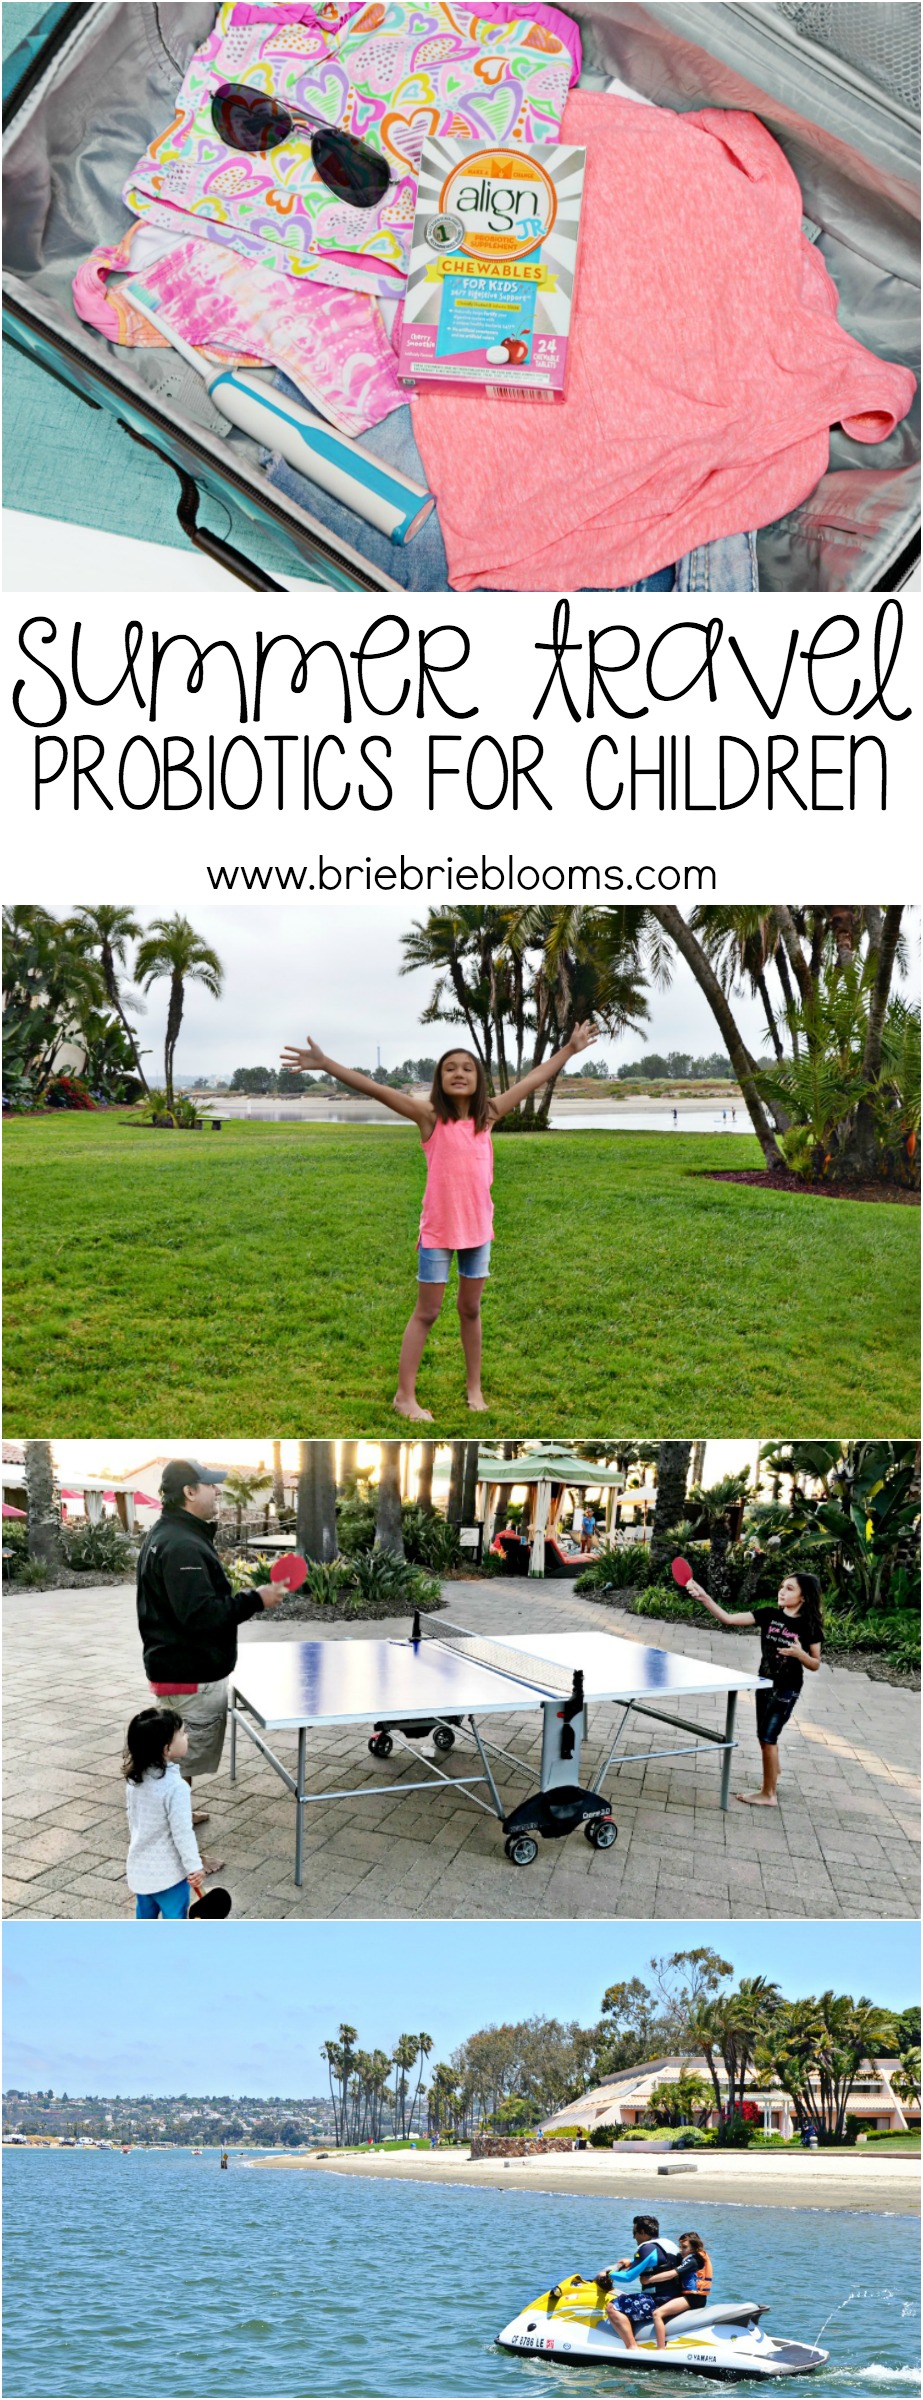 Summer travel can disrupt your normal routine and bring digestive challenges. Probiotics for children provide health benefits including healthy digestion.